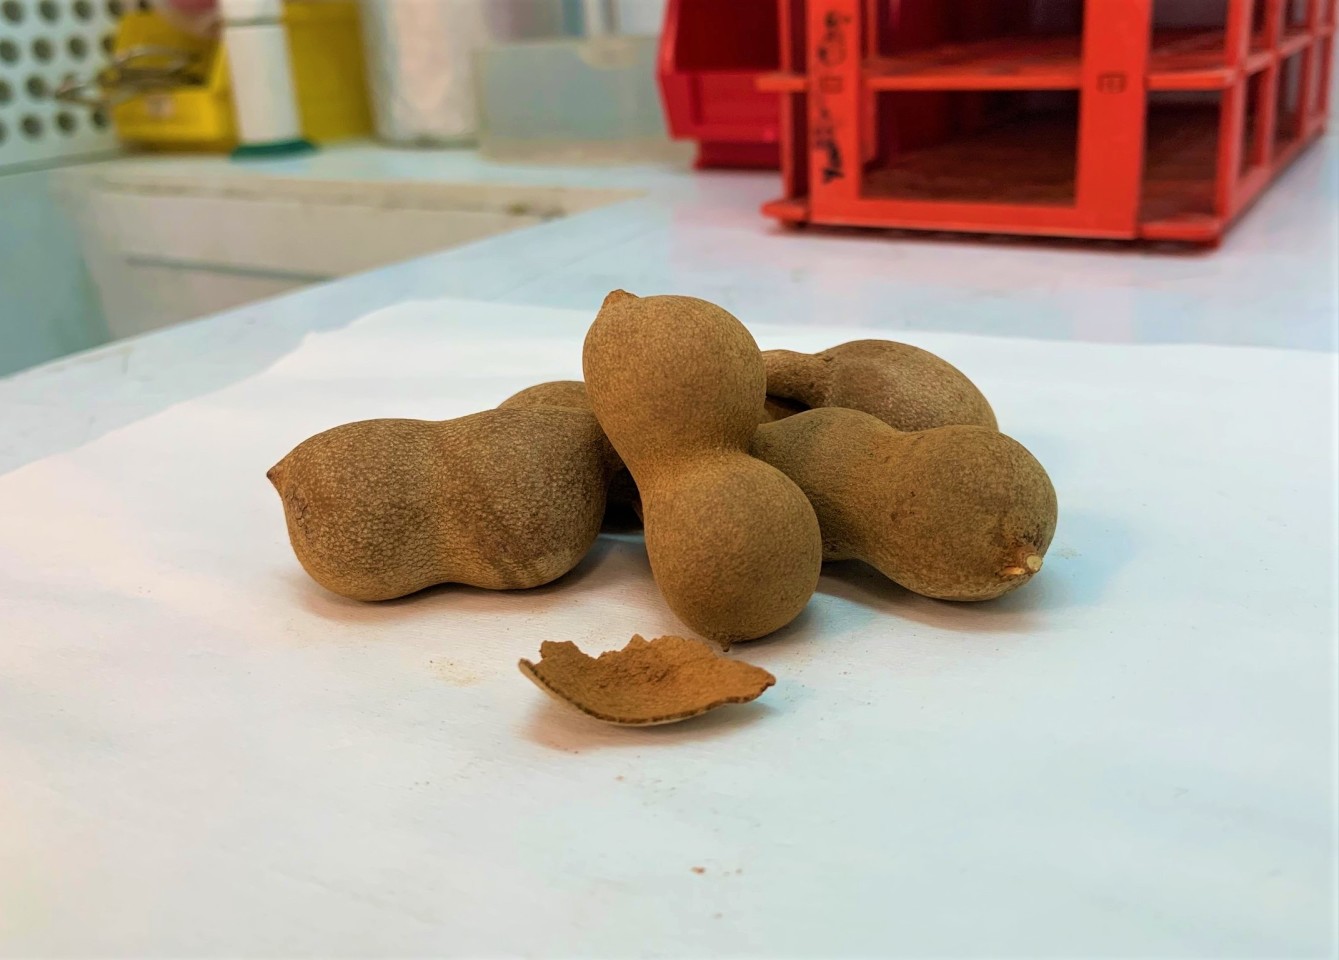 The bulky shells of tamarind fruit pods take up a disproportionately large amount of space in landfills